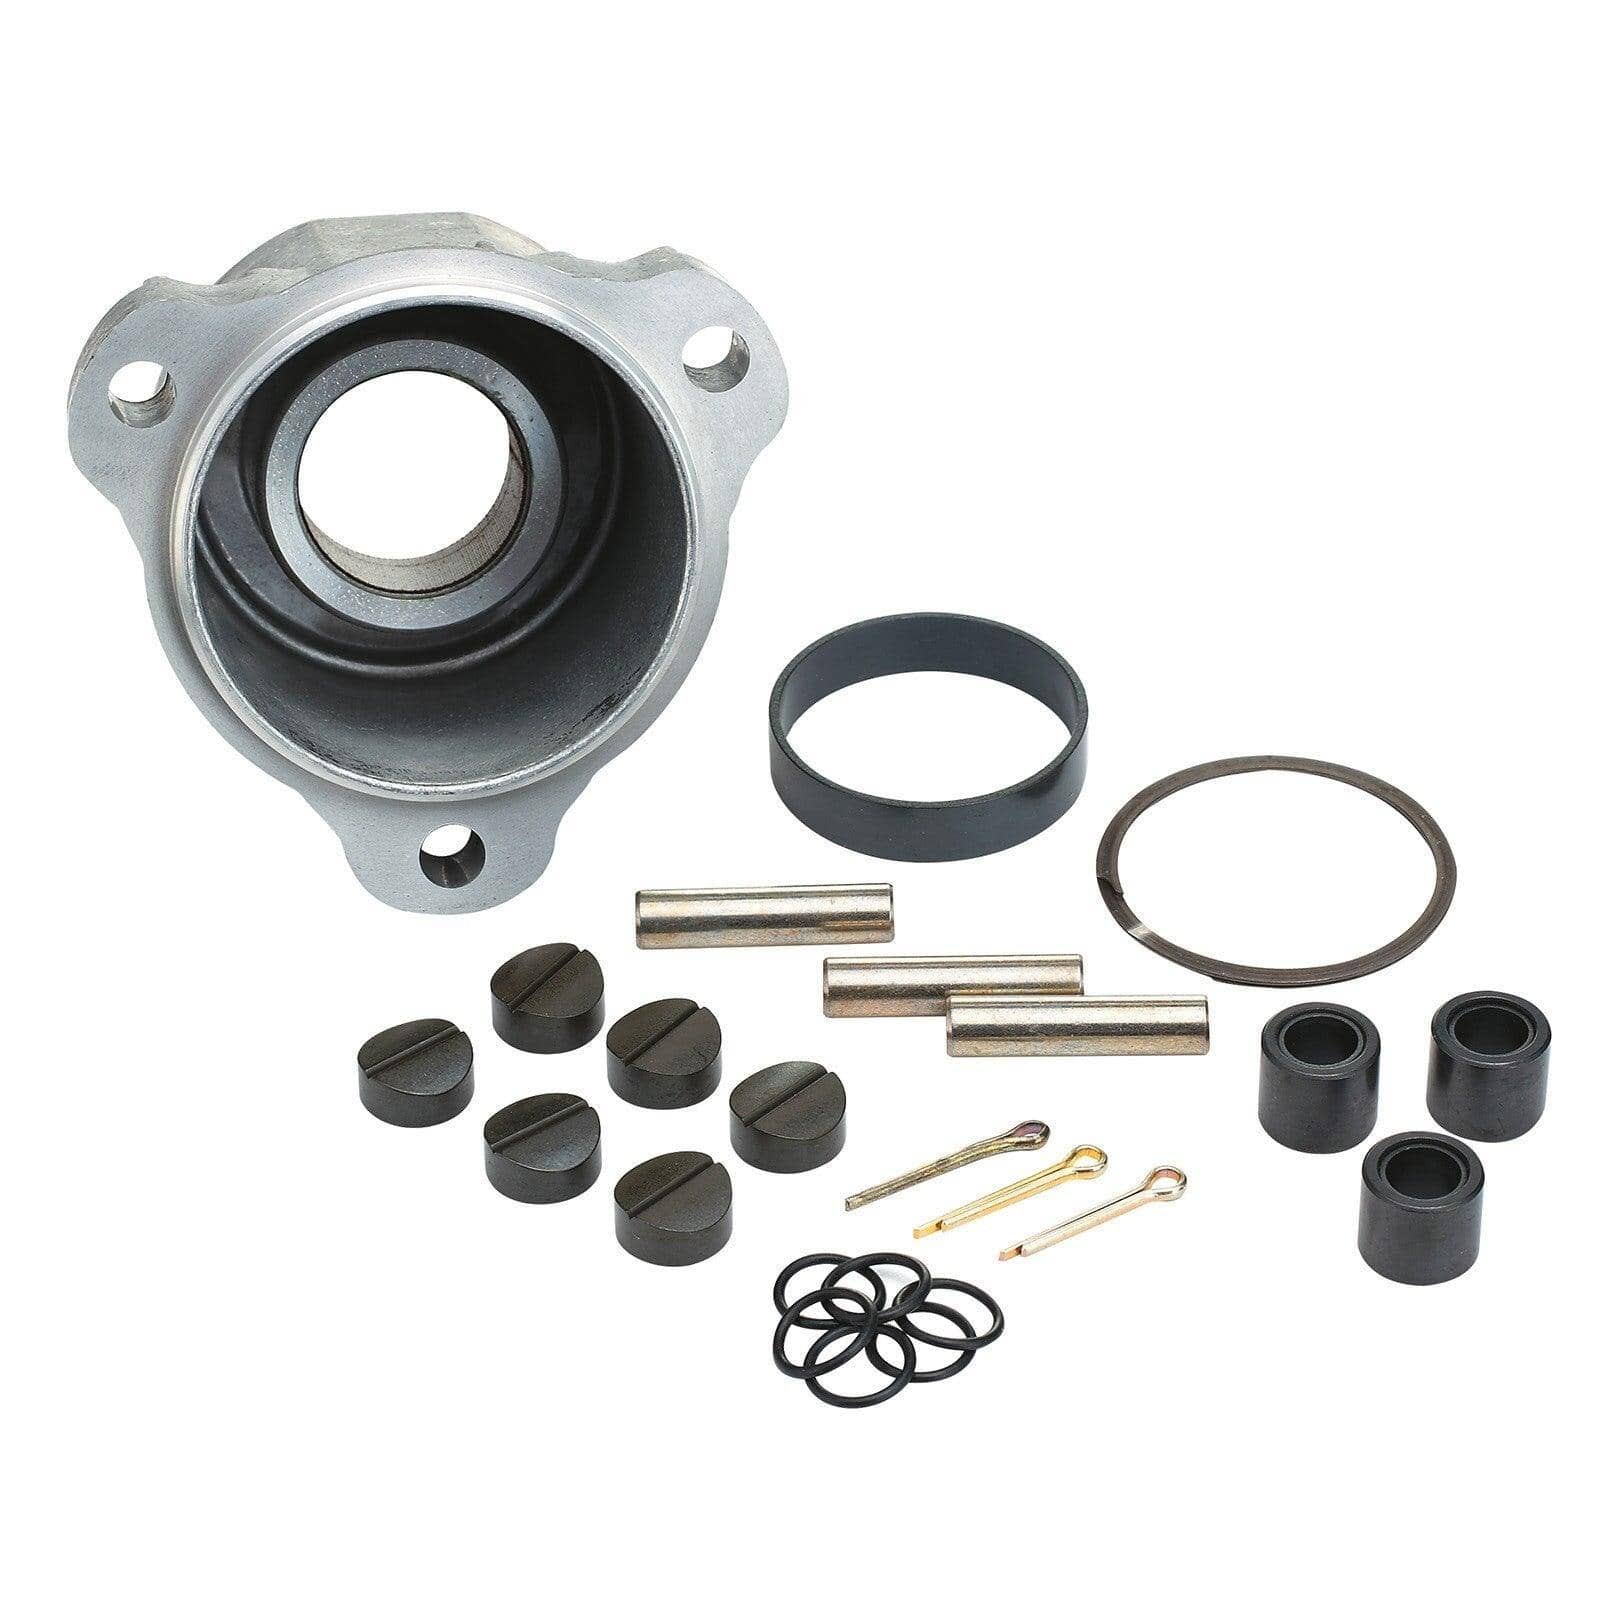 Maintenance Kit for TRA Drive Pulley - 2008 to 2010 (800R P-TEK & 800R E-TEC)